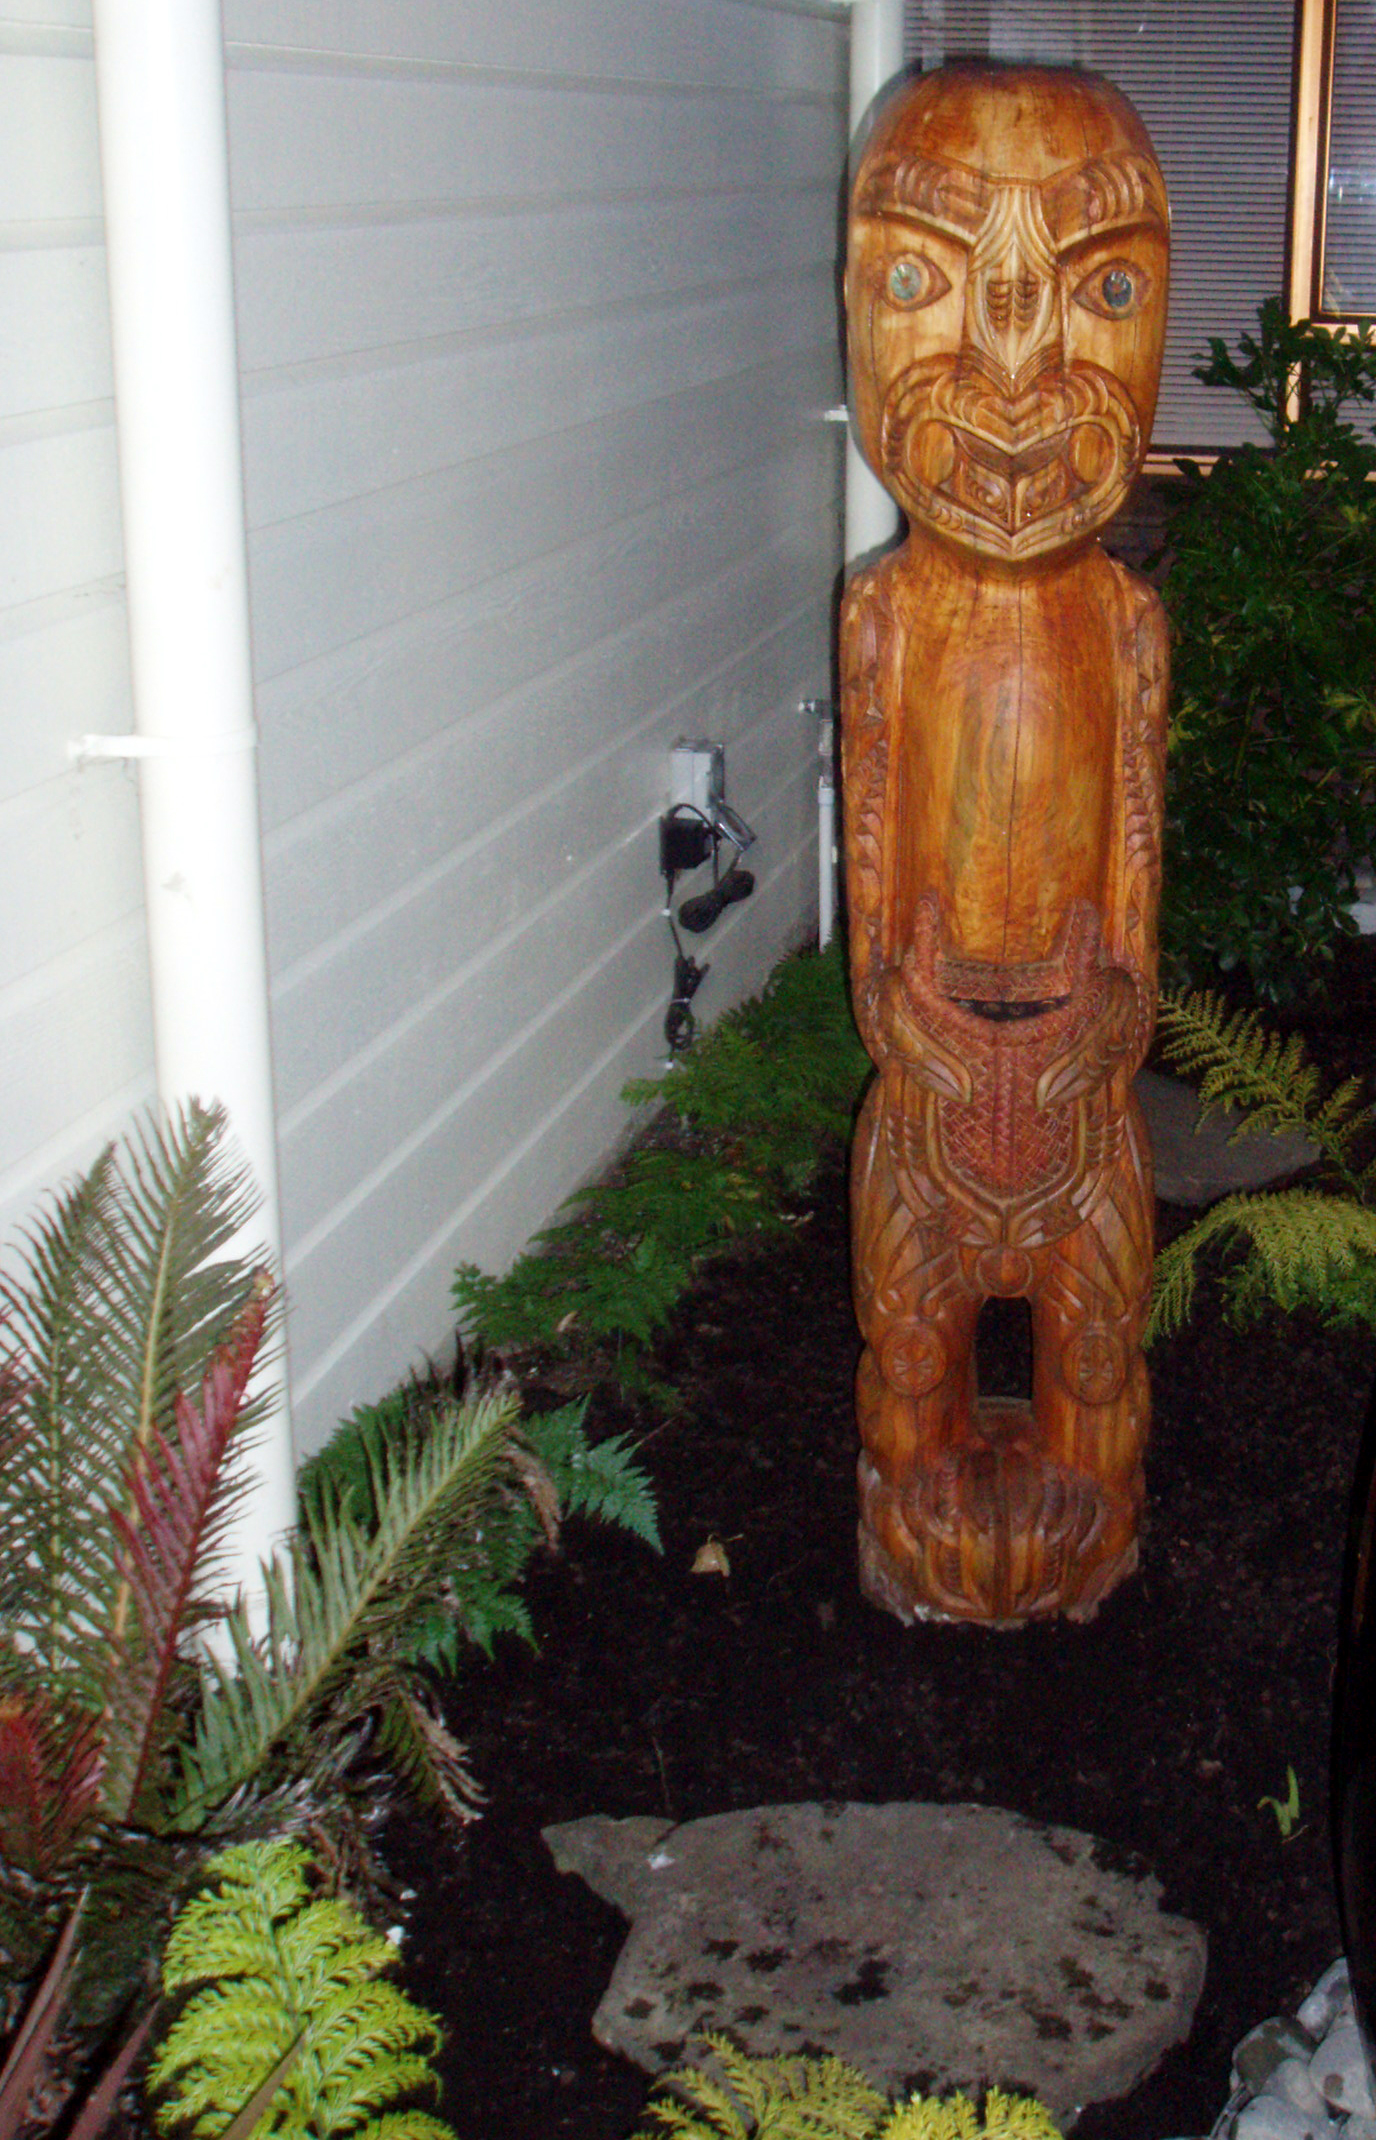 The pou (carved pole), in the garden in front of the North Shore Hospice